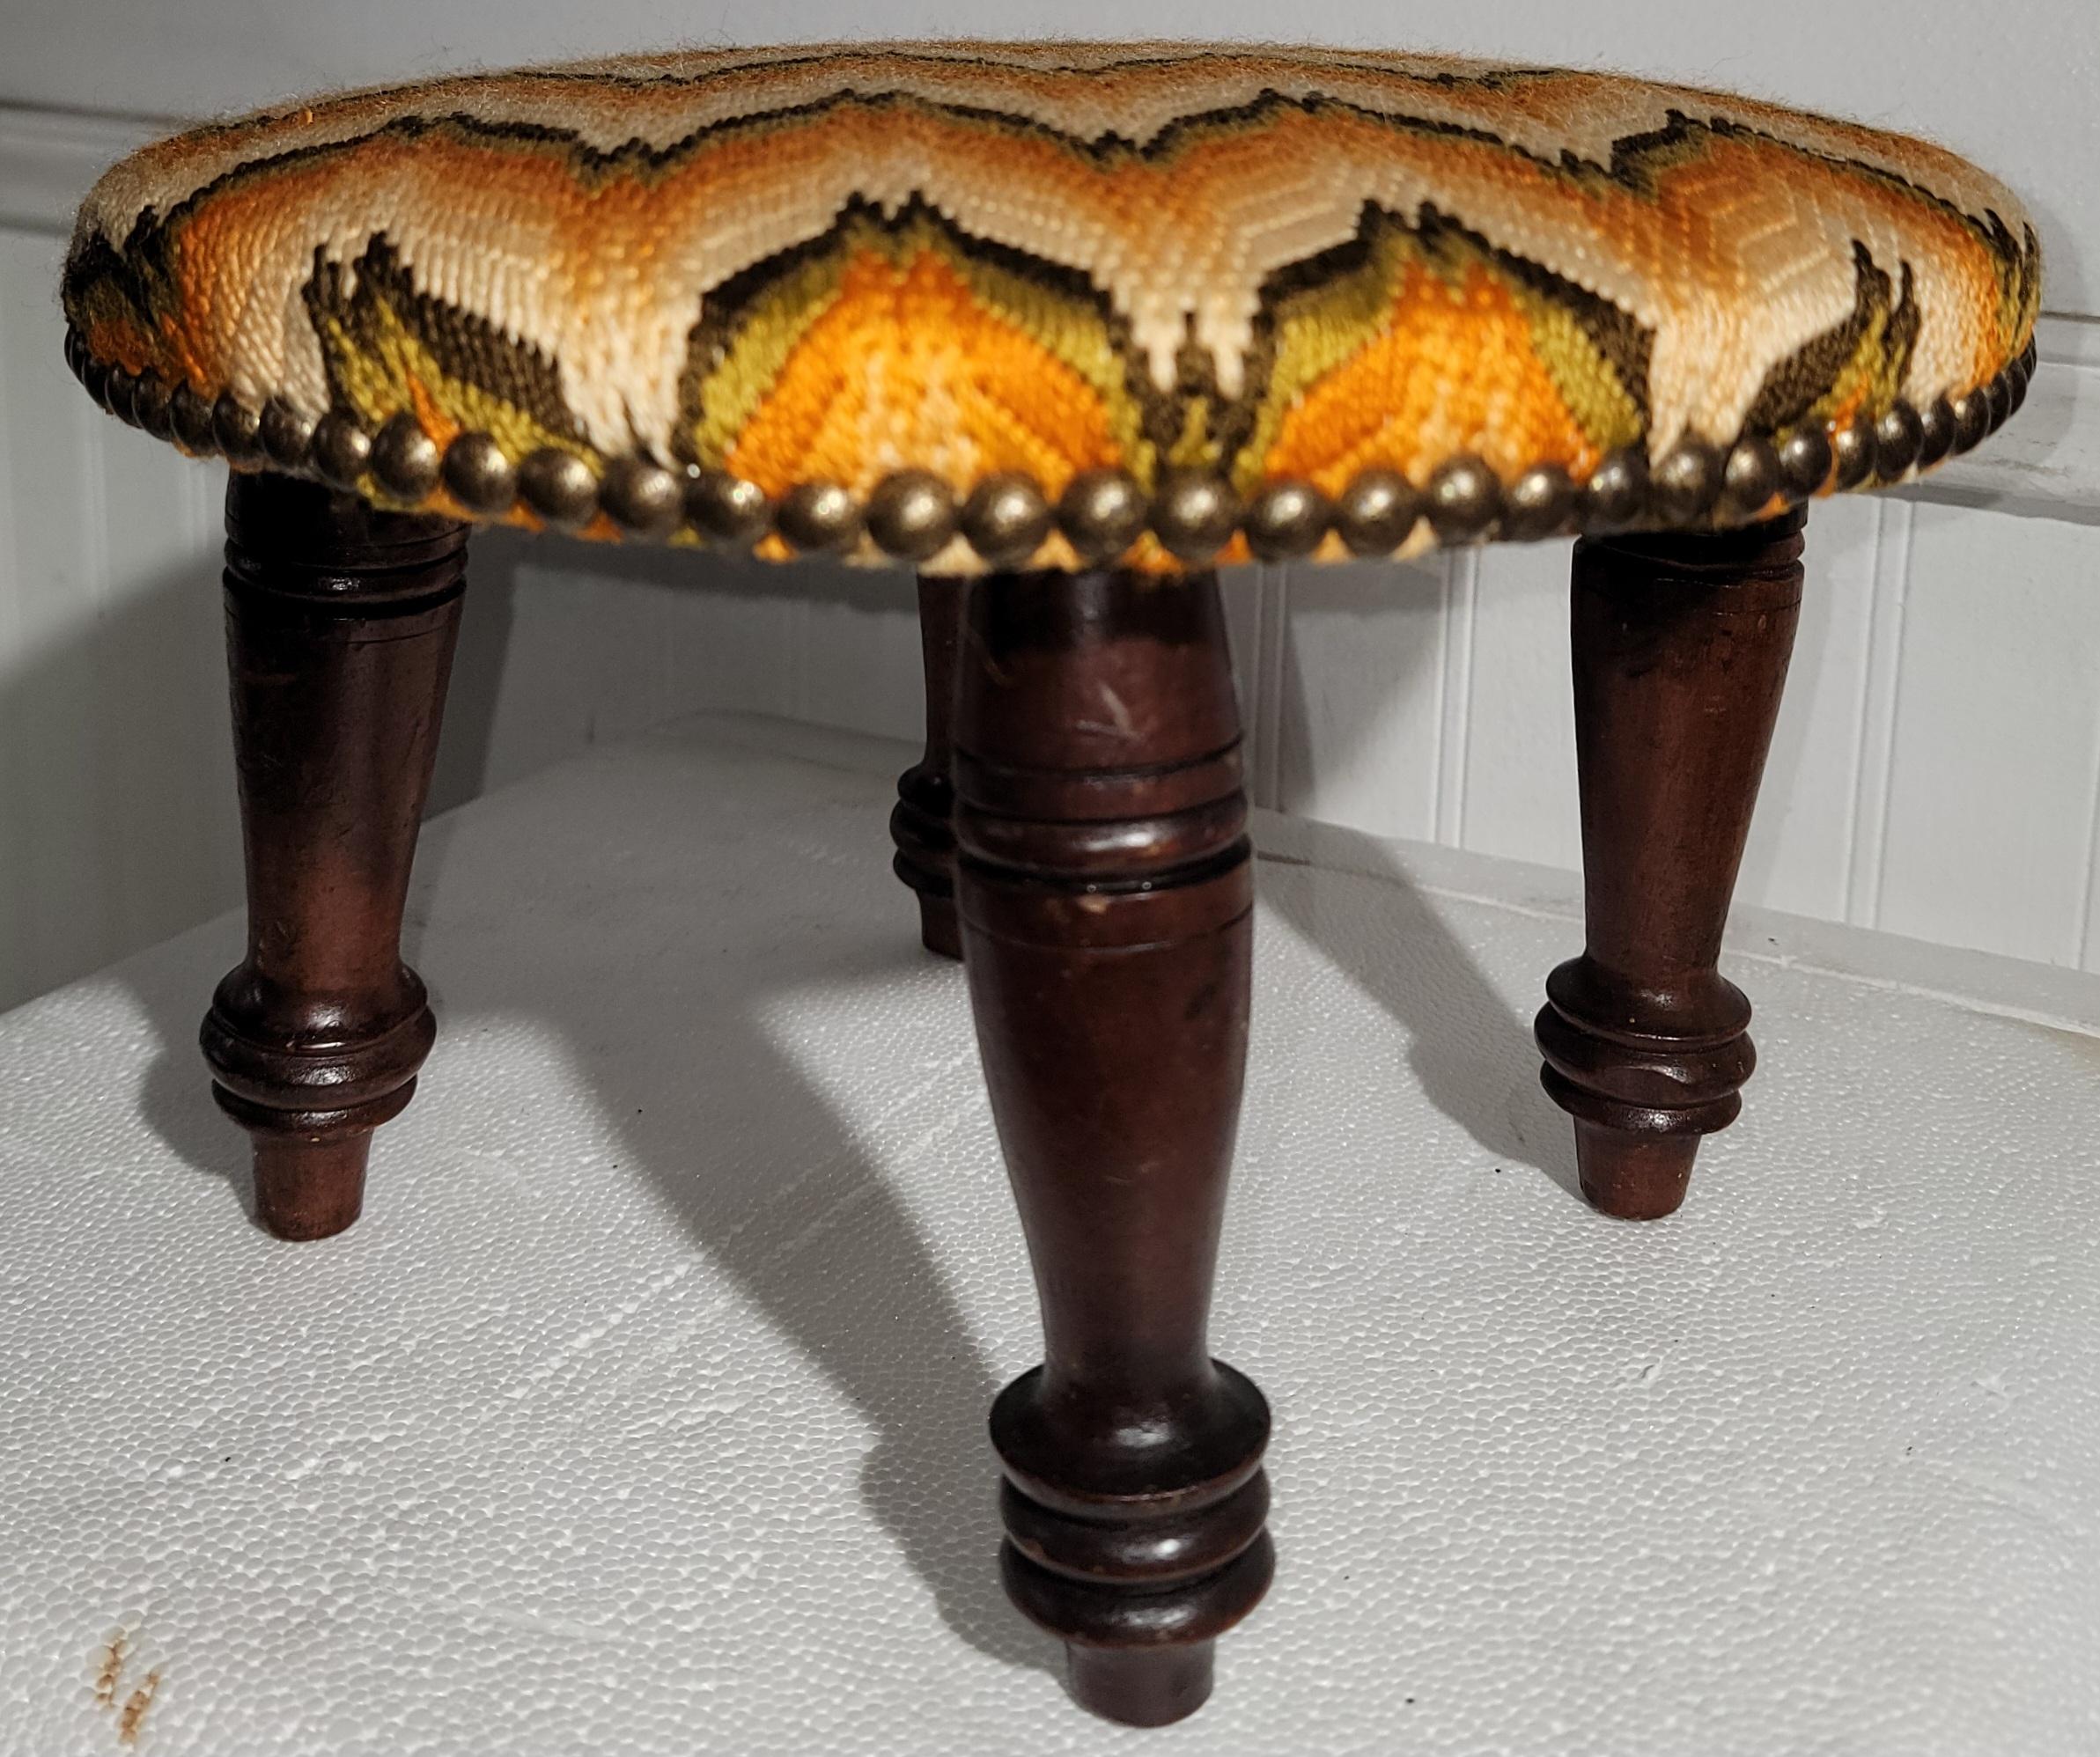 This fantastic hand carved foot stool is dated 1842 and is made in New Hampshire.The condition is pristine.The flame stitch wool fabric was newly re-upholstered and is also in very good condition.